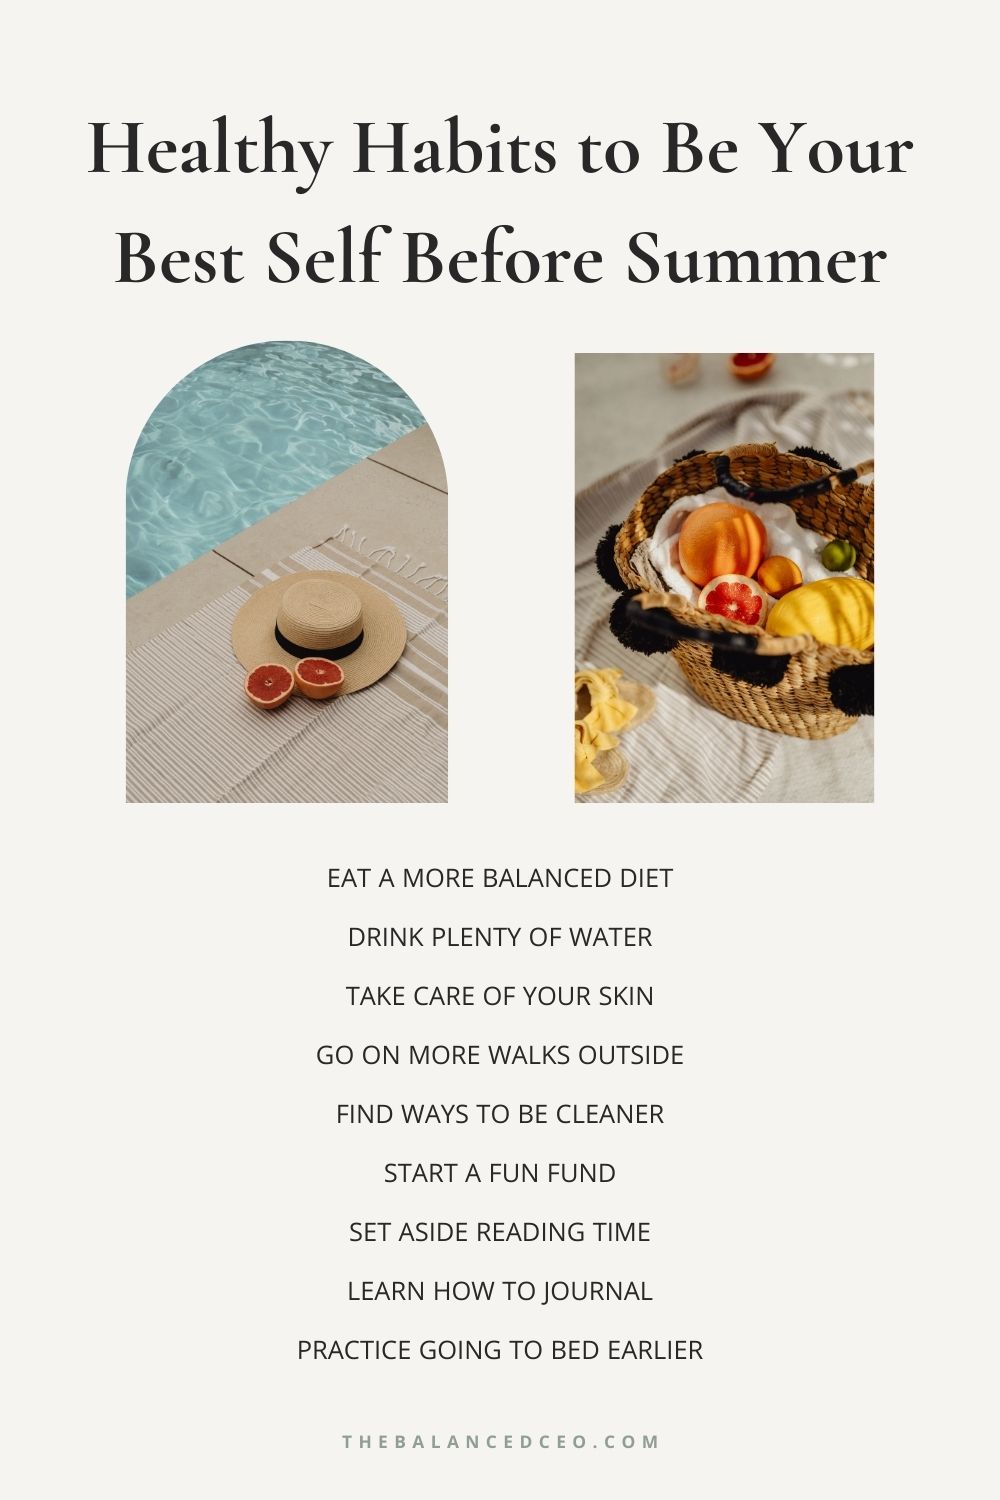 Healthy Habits to Be Your Best Self Before Summer